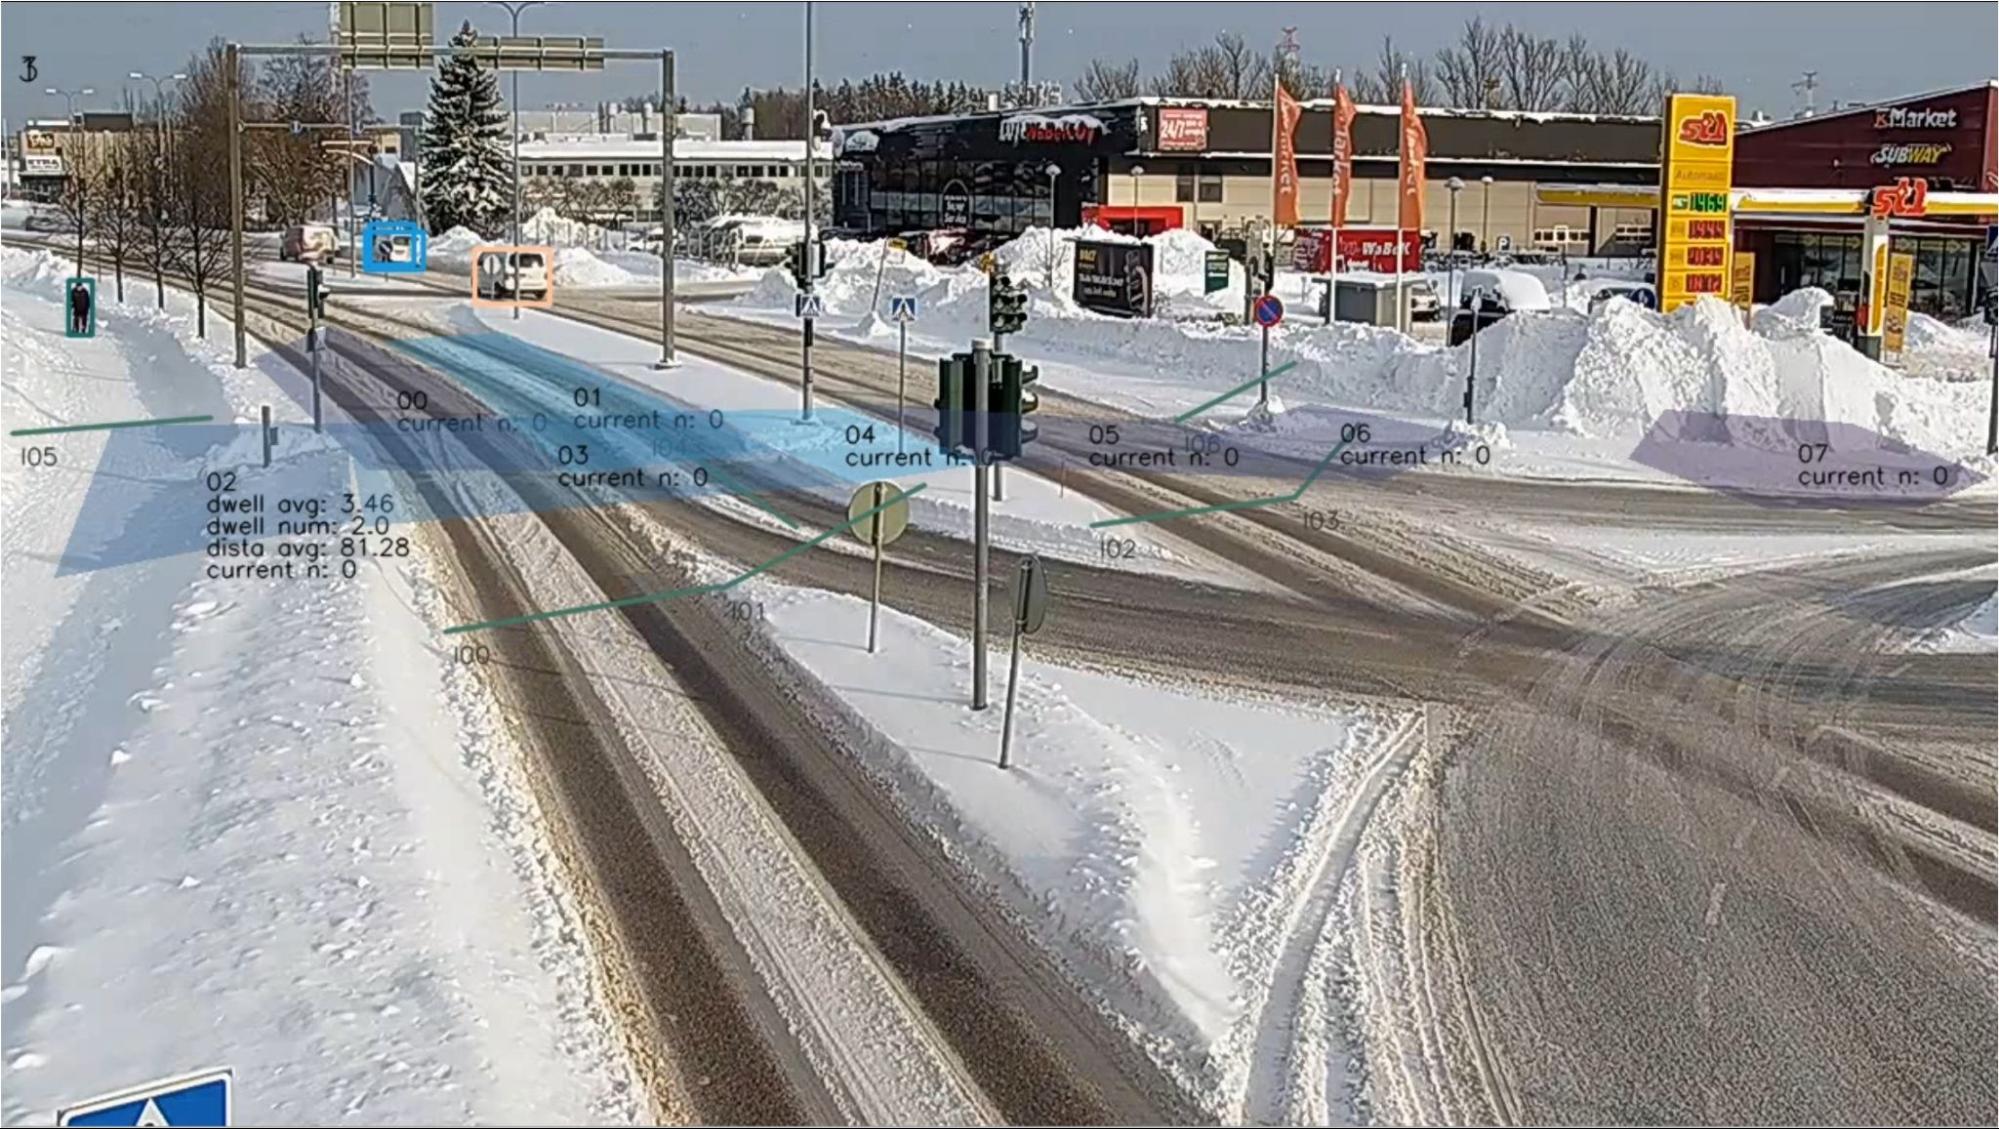 Image of MarshallAI application at a traffic intersection in a snowy town.